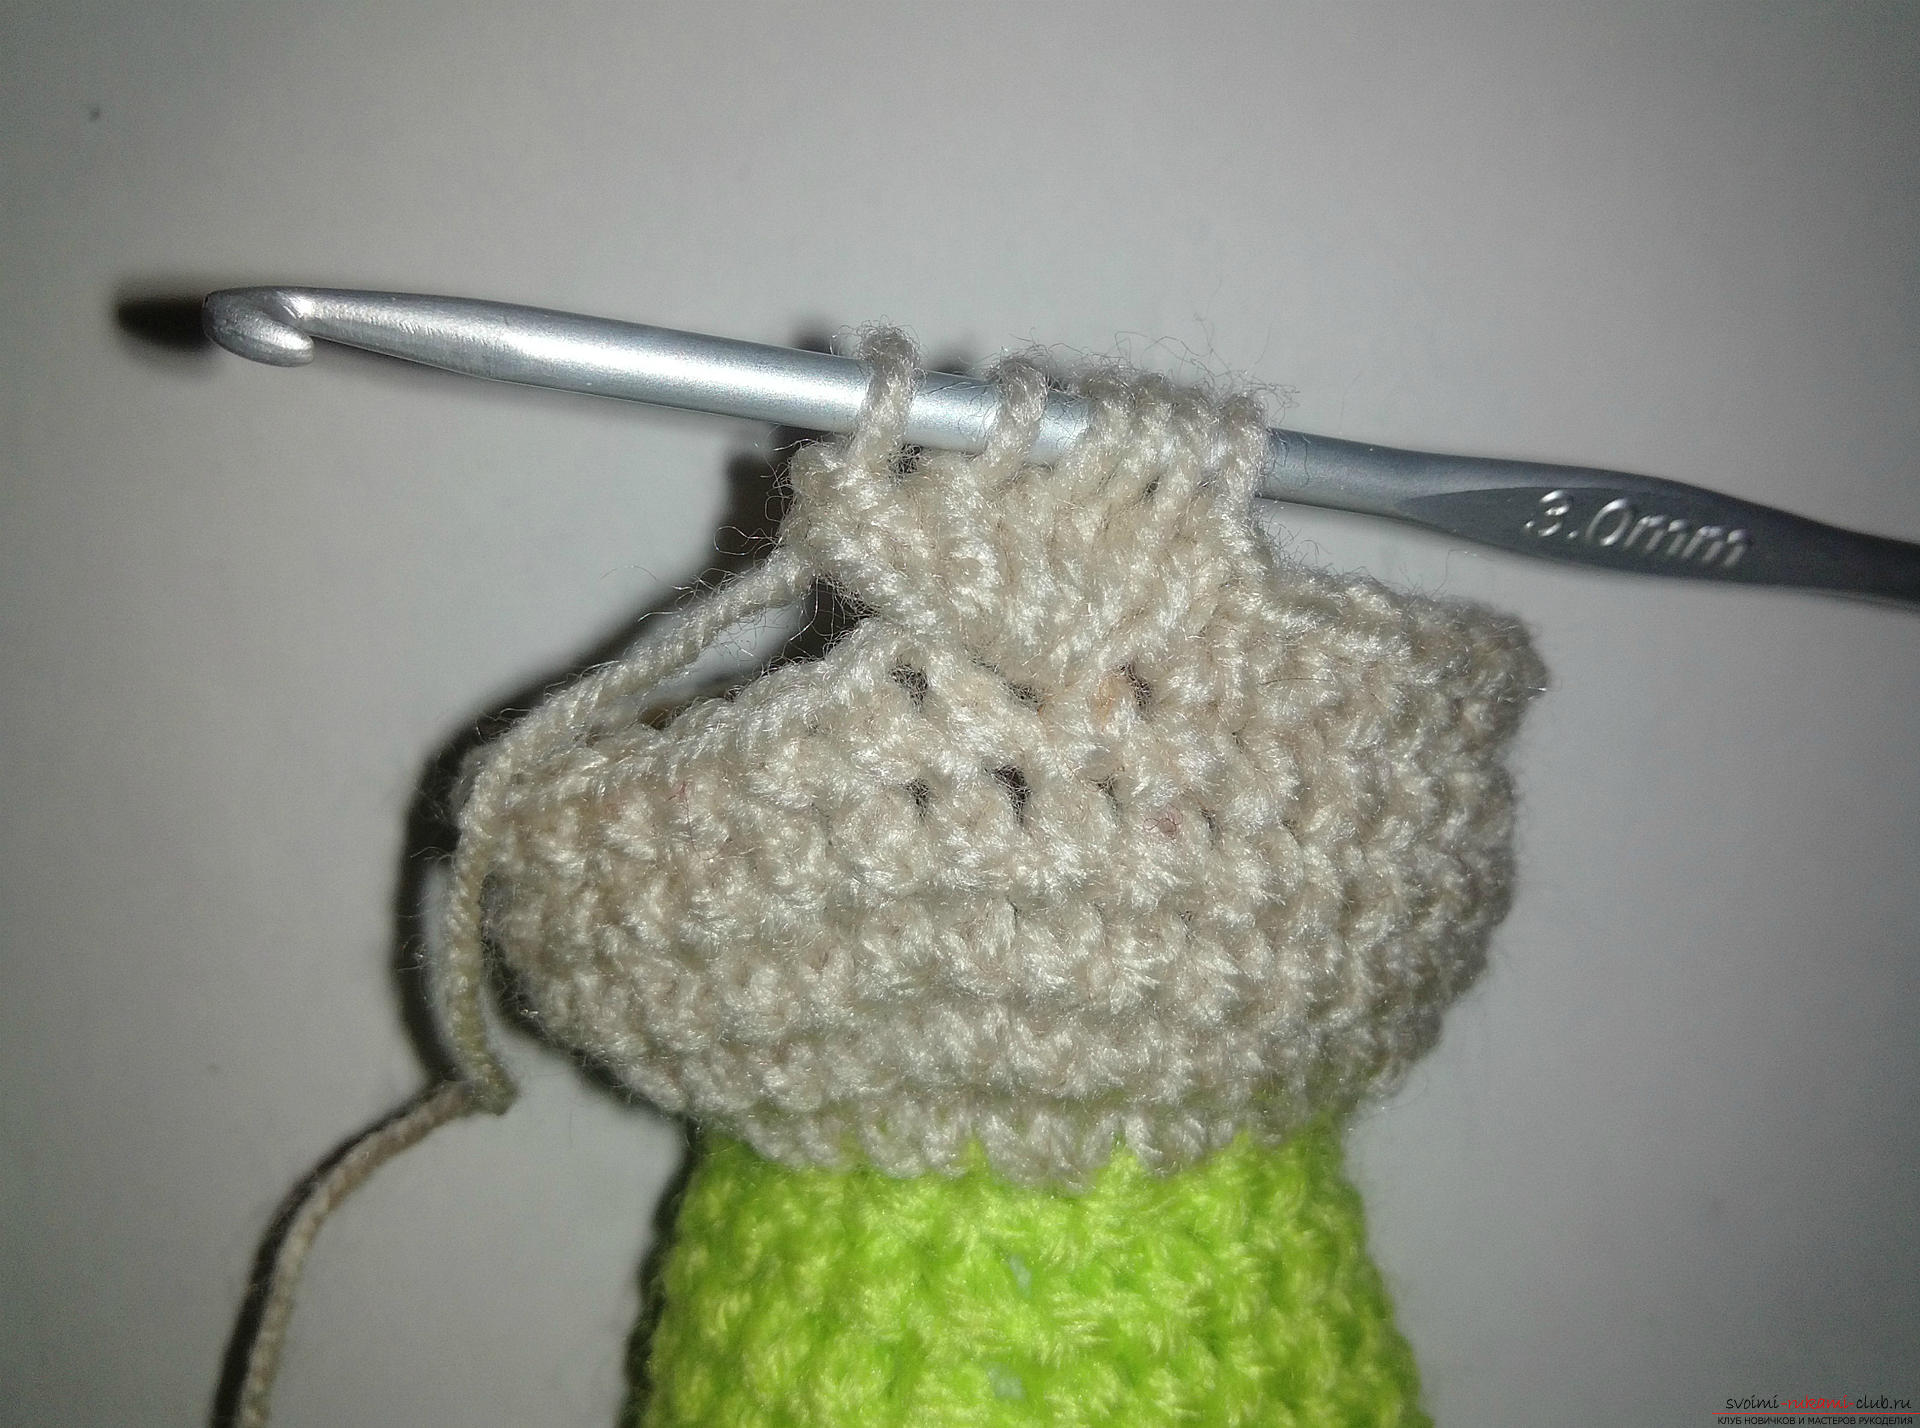 A master class with a photo and description will teach you how to tie a crocheted dwarf toy. Photo №7